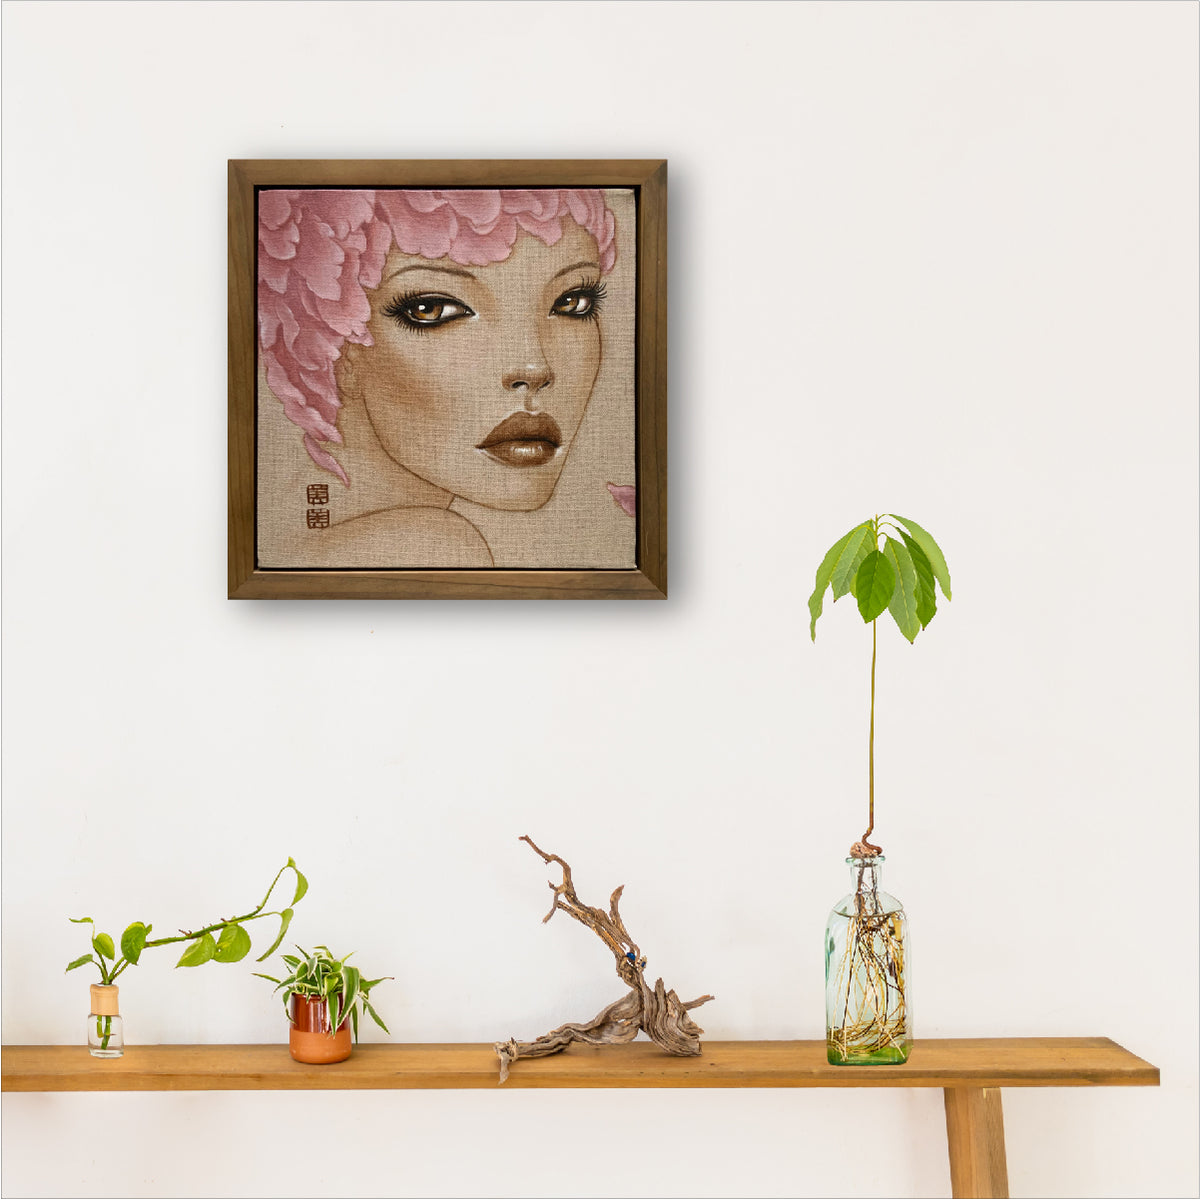 framed painting of a woman's face - she has large eyes and lips and is wearing a feather hat